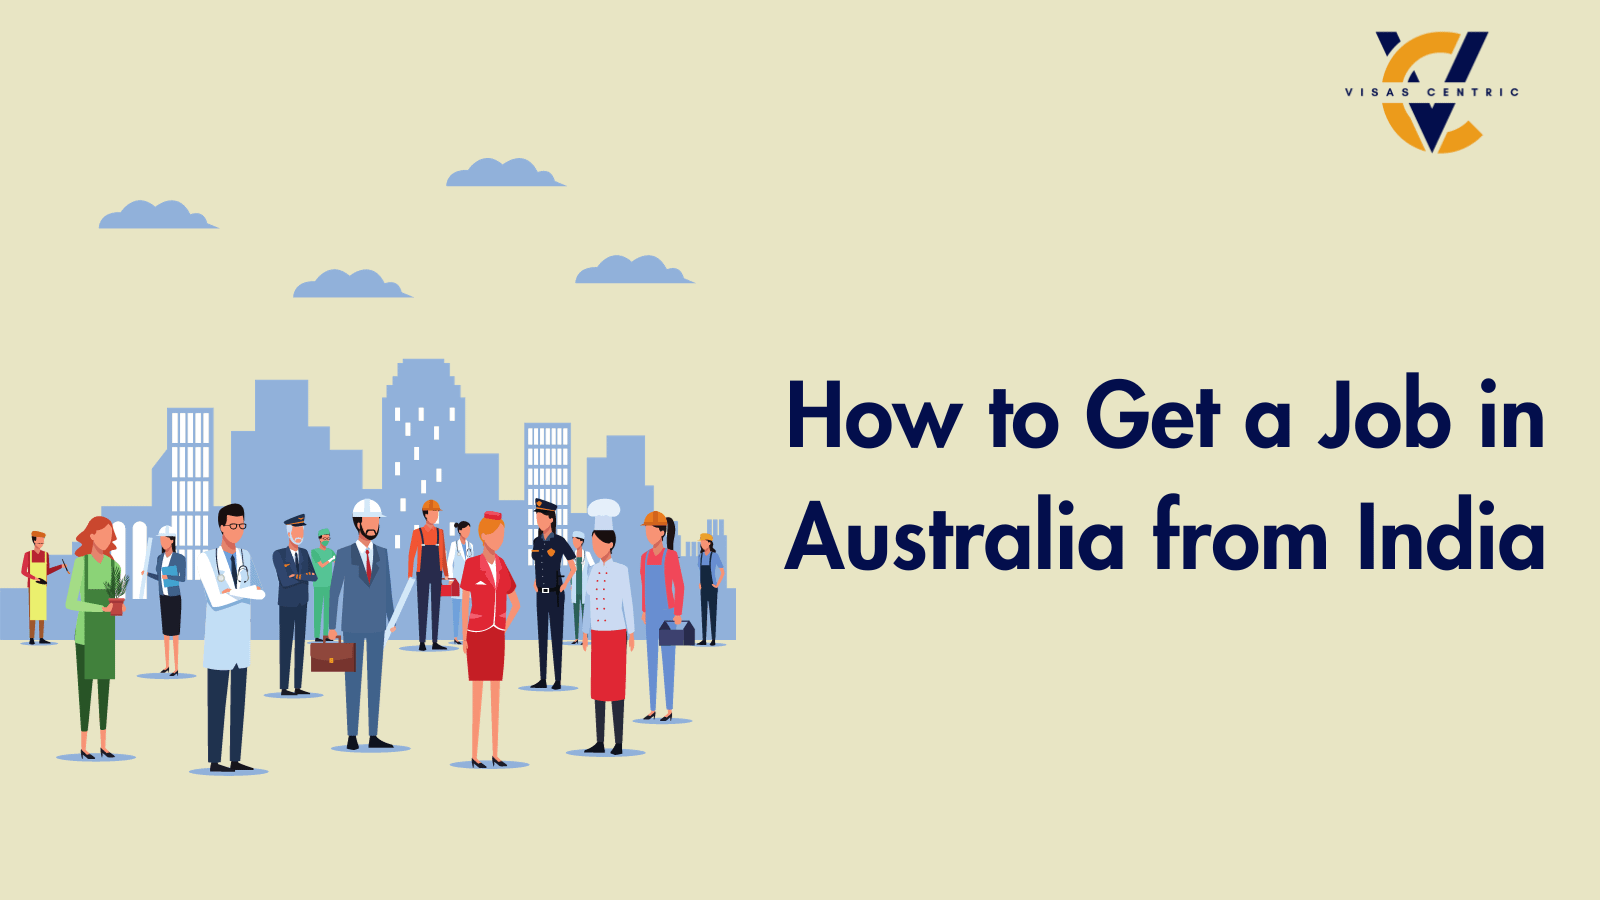 How to Get a Job in Australia from India